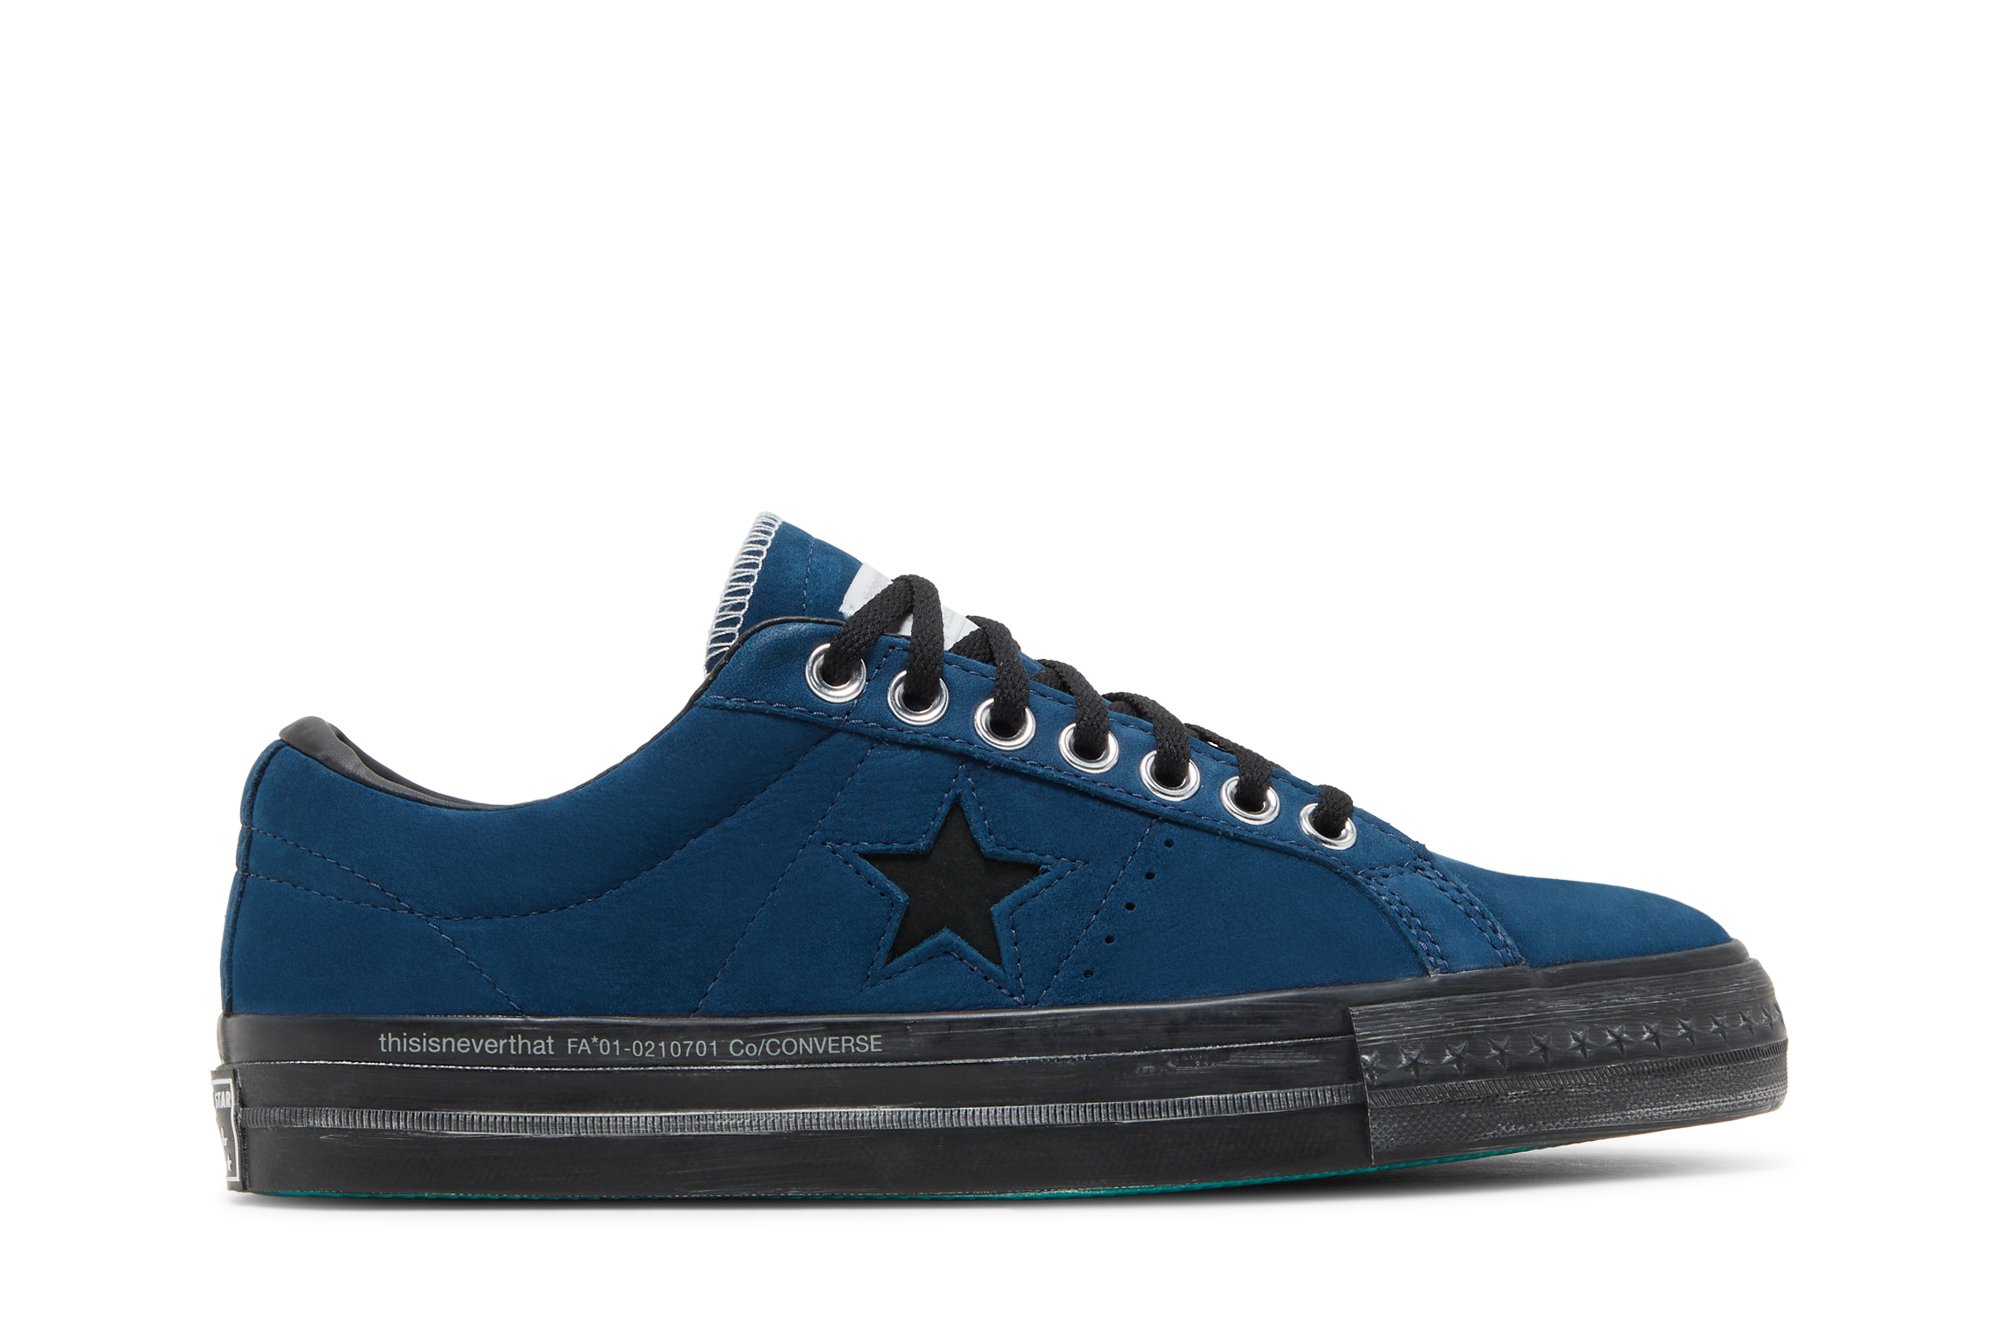 thisisneverthat x One Star Low 'New Vintage'